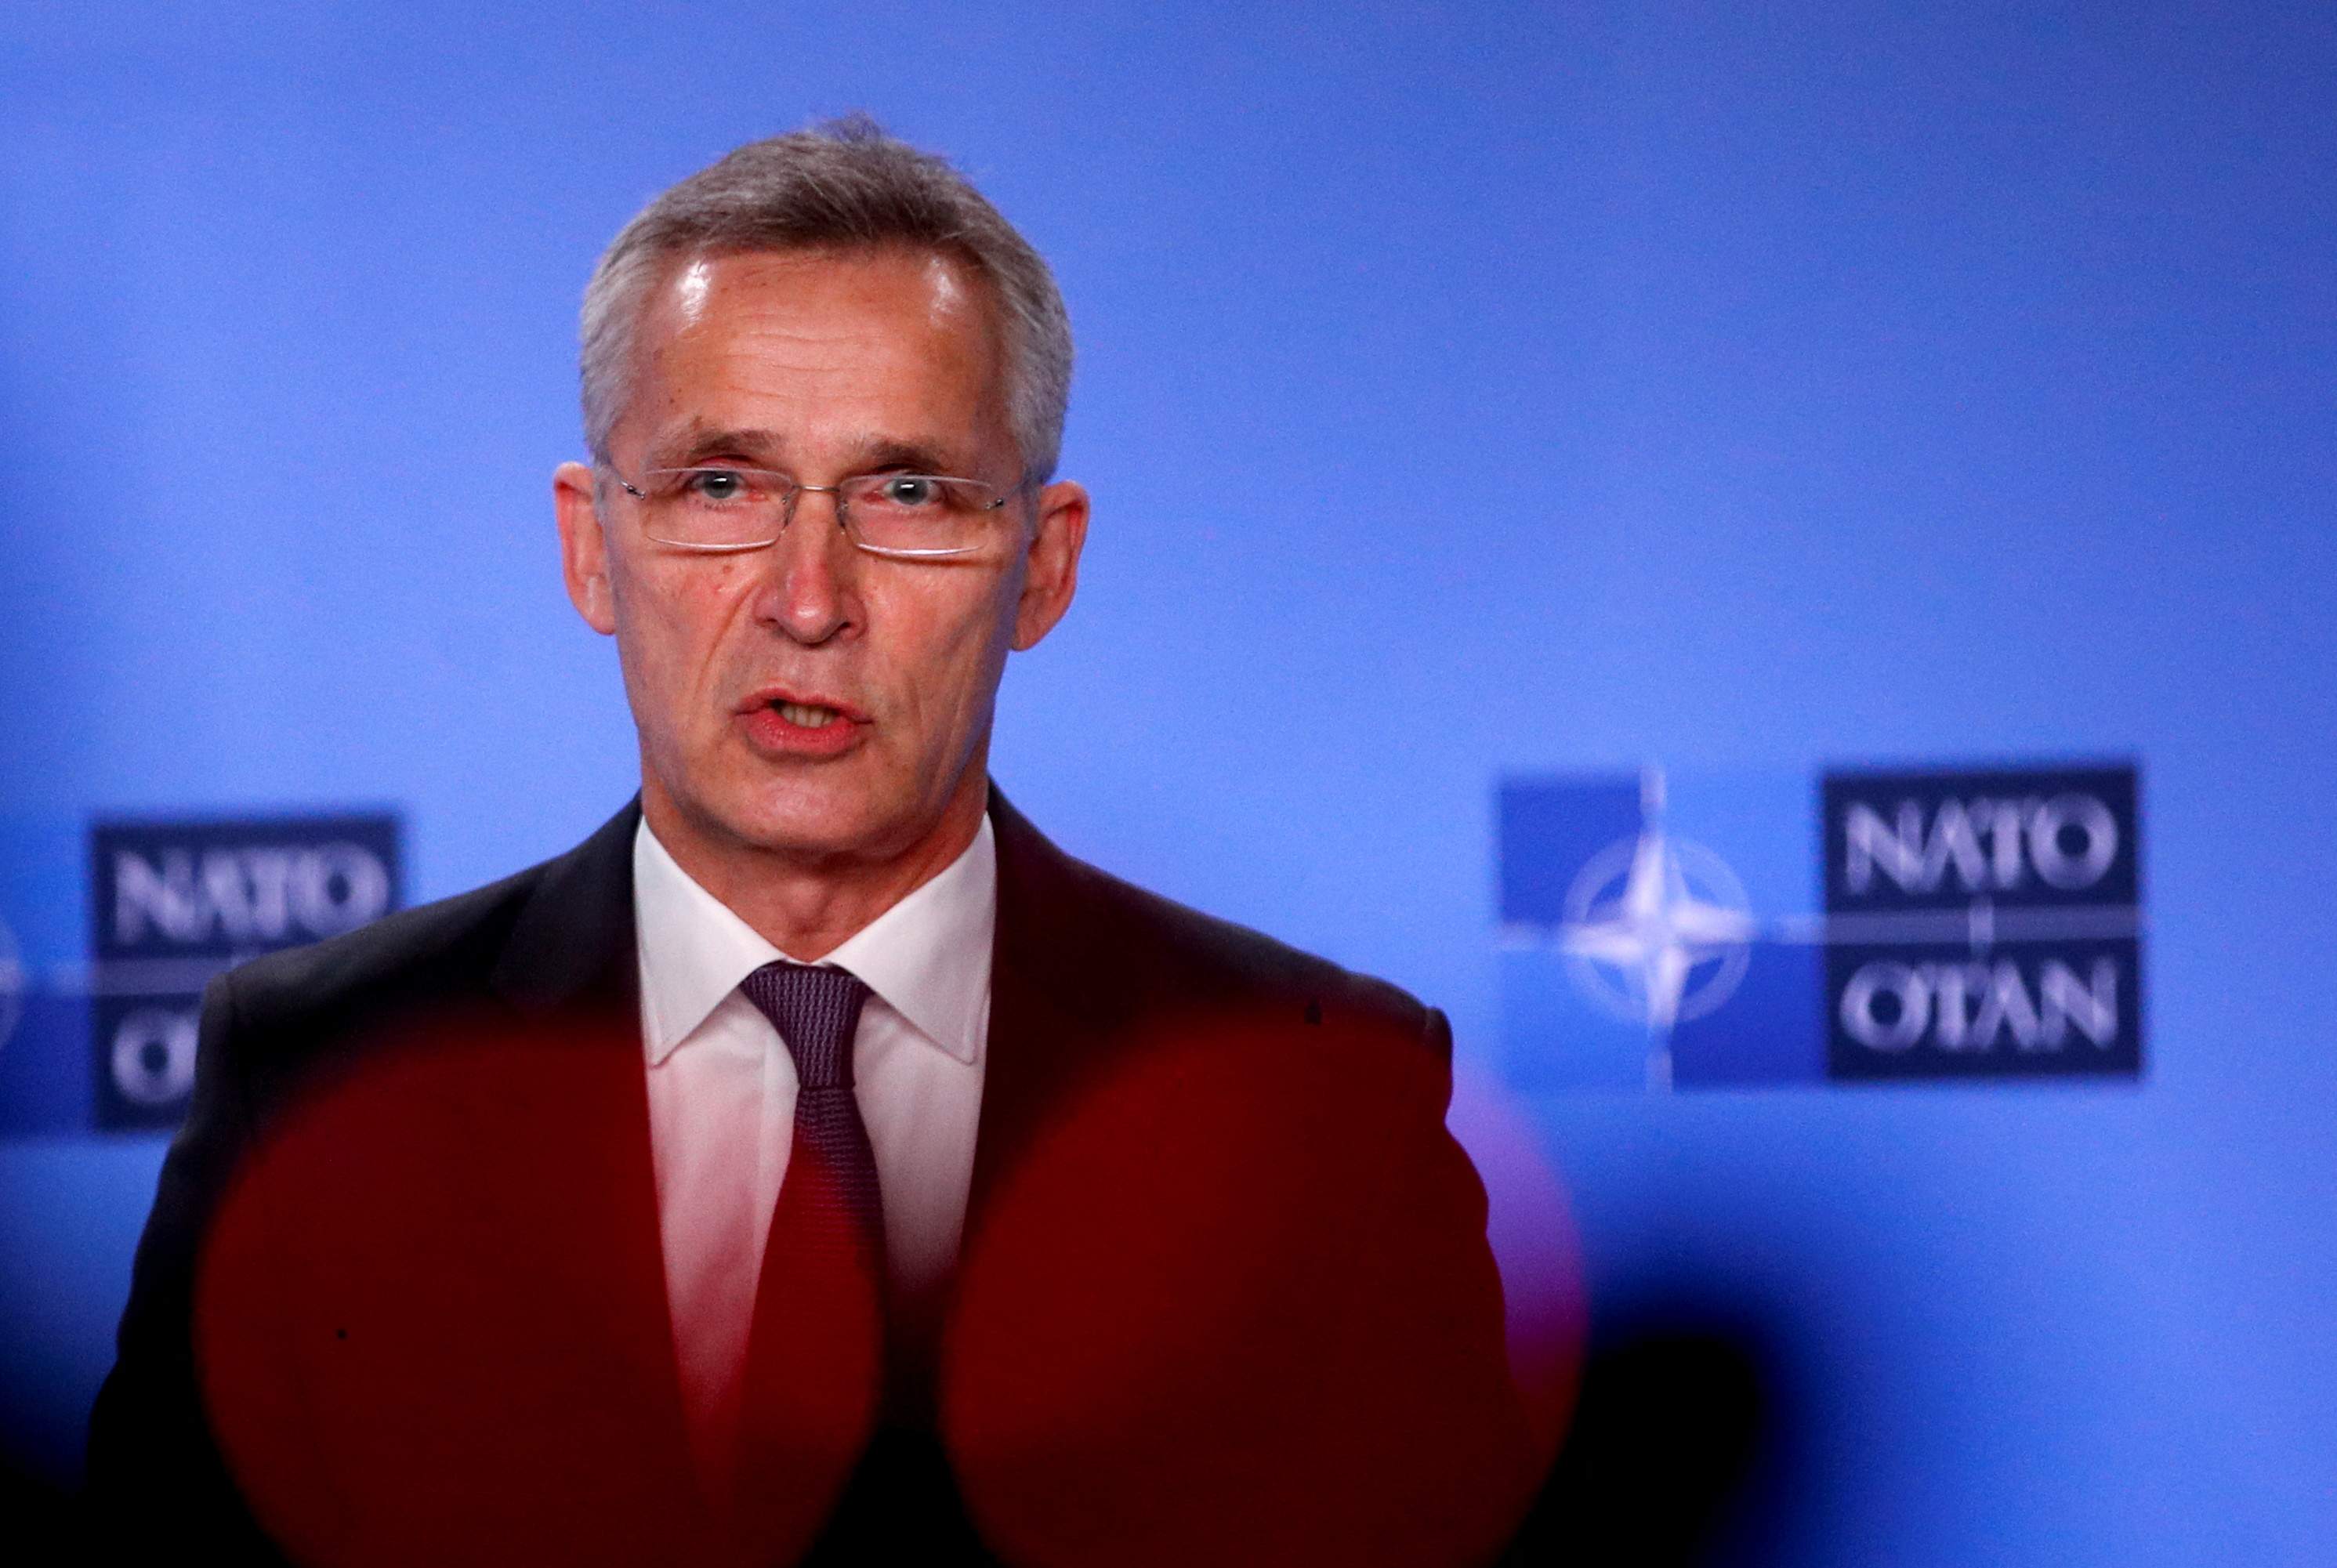 NATO Secretary General Stoltenberg and North Macedonian PM Kovacevski hold a joint news conference in Brussels